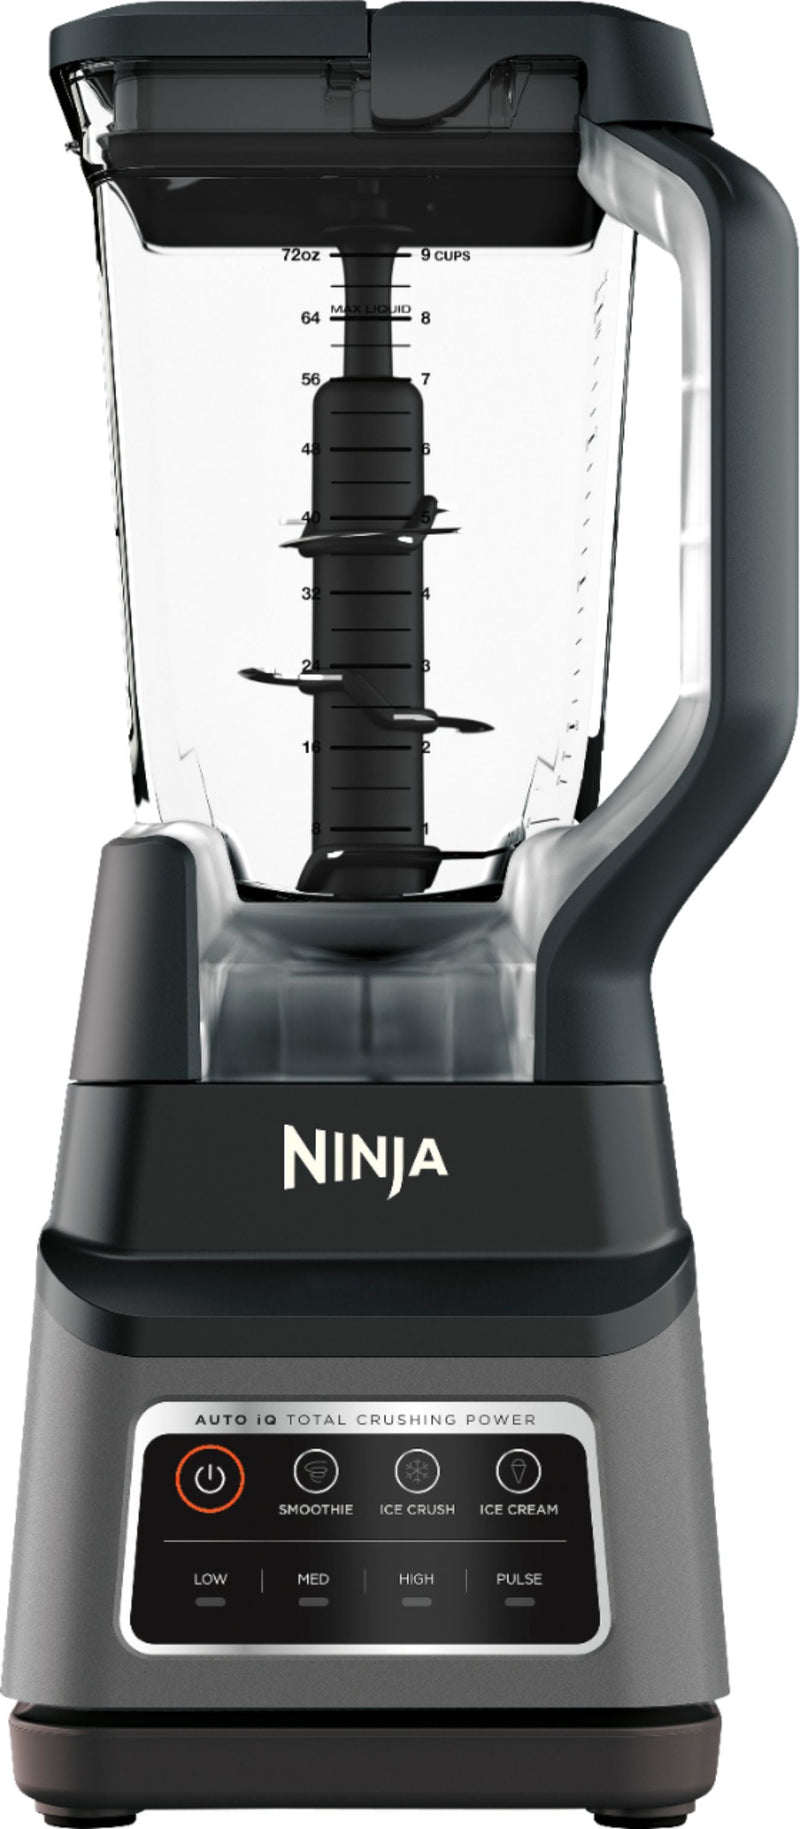 Professional Plus Blender DUO with Auto-IQ - Black: Stainless Steel Listing